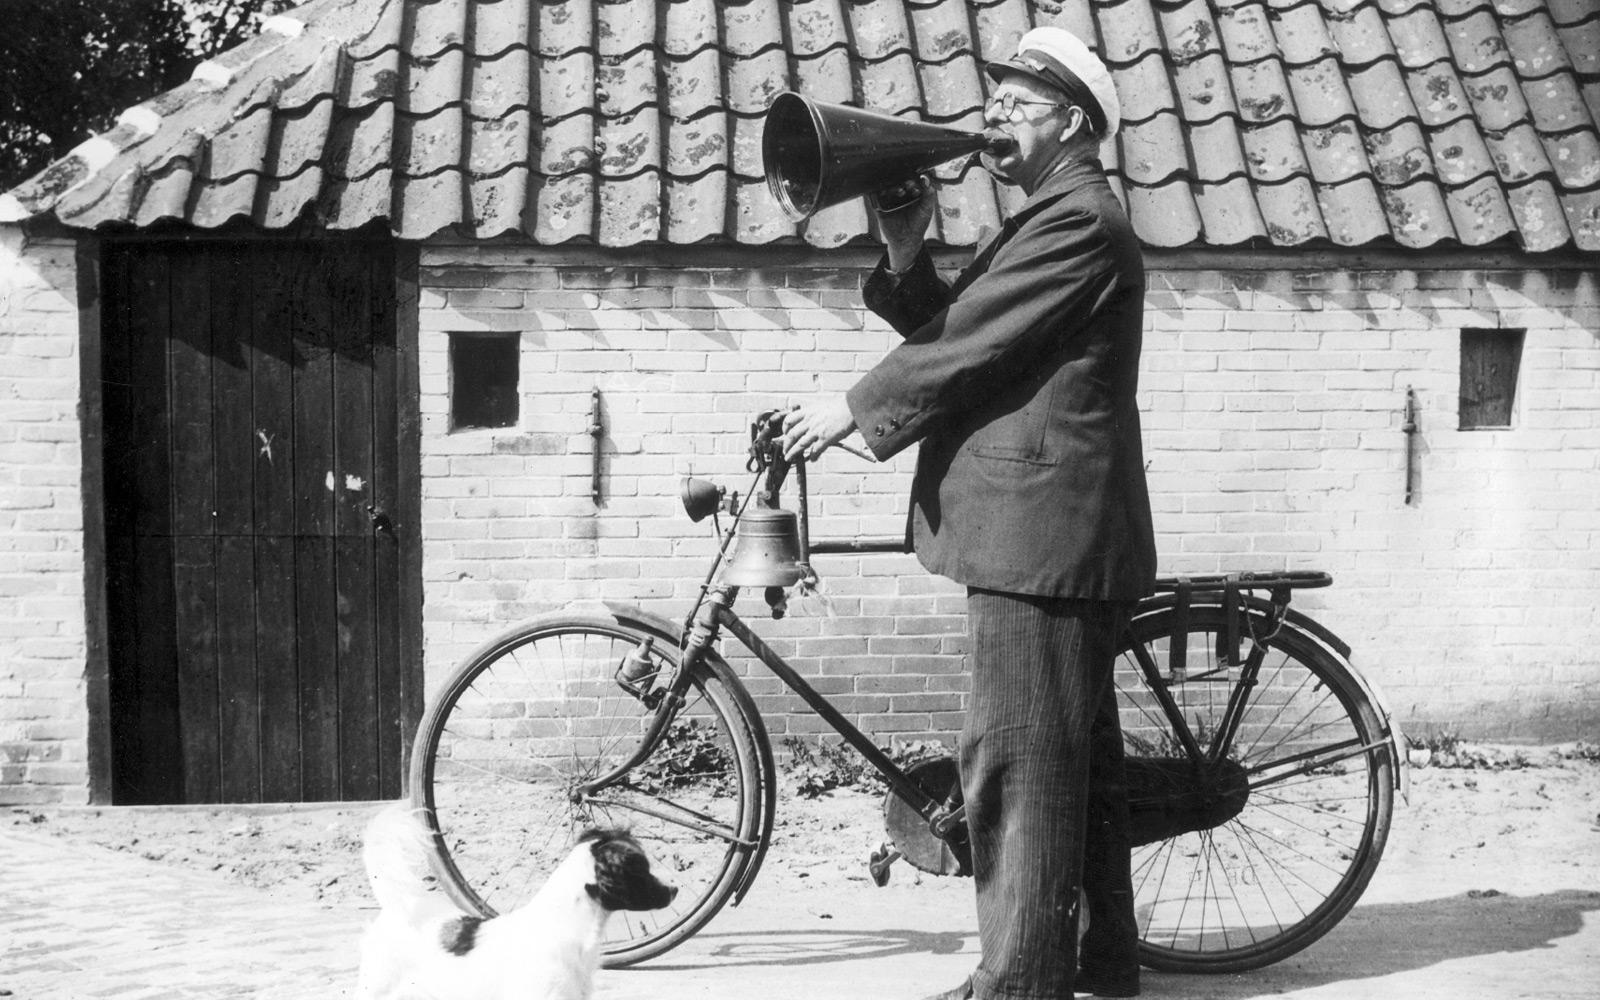 Town-crier announcing the latest news on the island of Terschelling. Netherlands, 1938